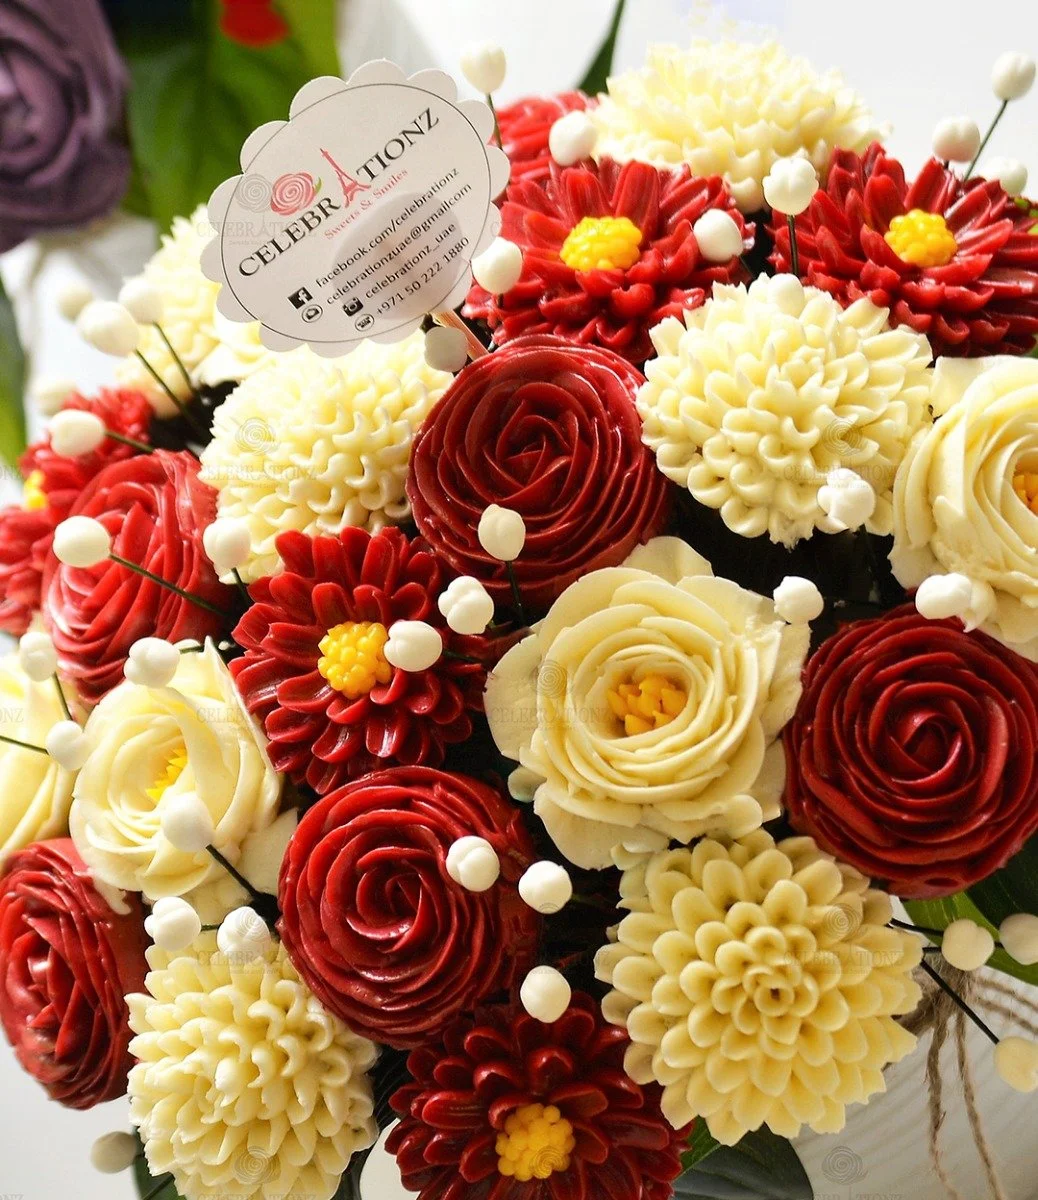 The Gorgeous Mini Flower Cupcakes Bouquet from Sweet Celebrationz